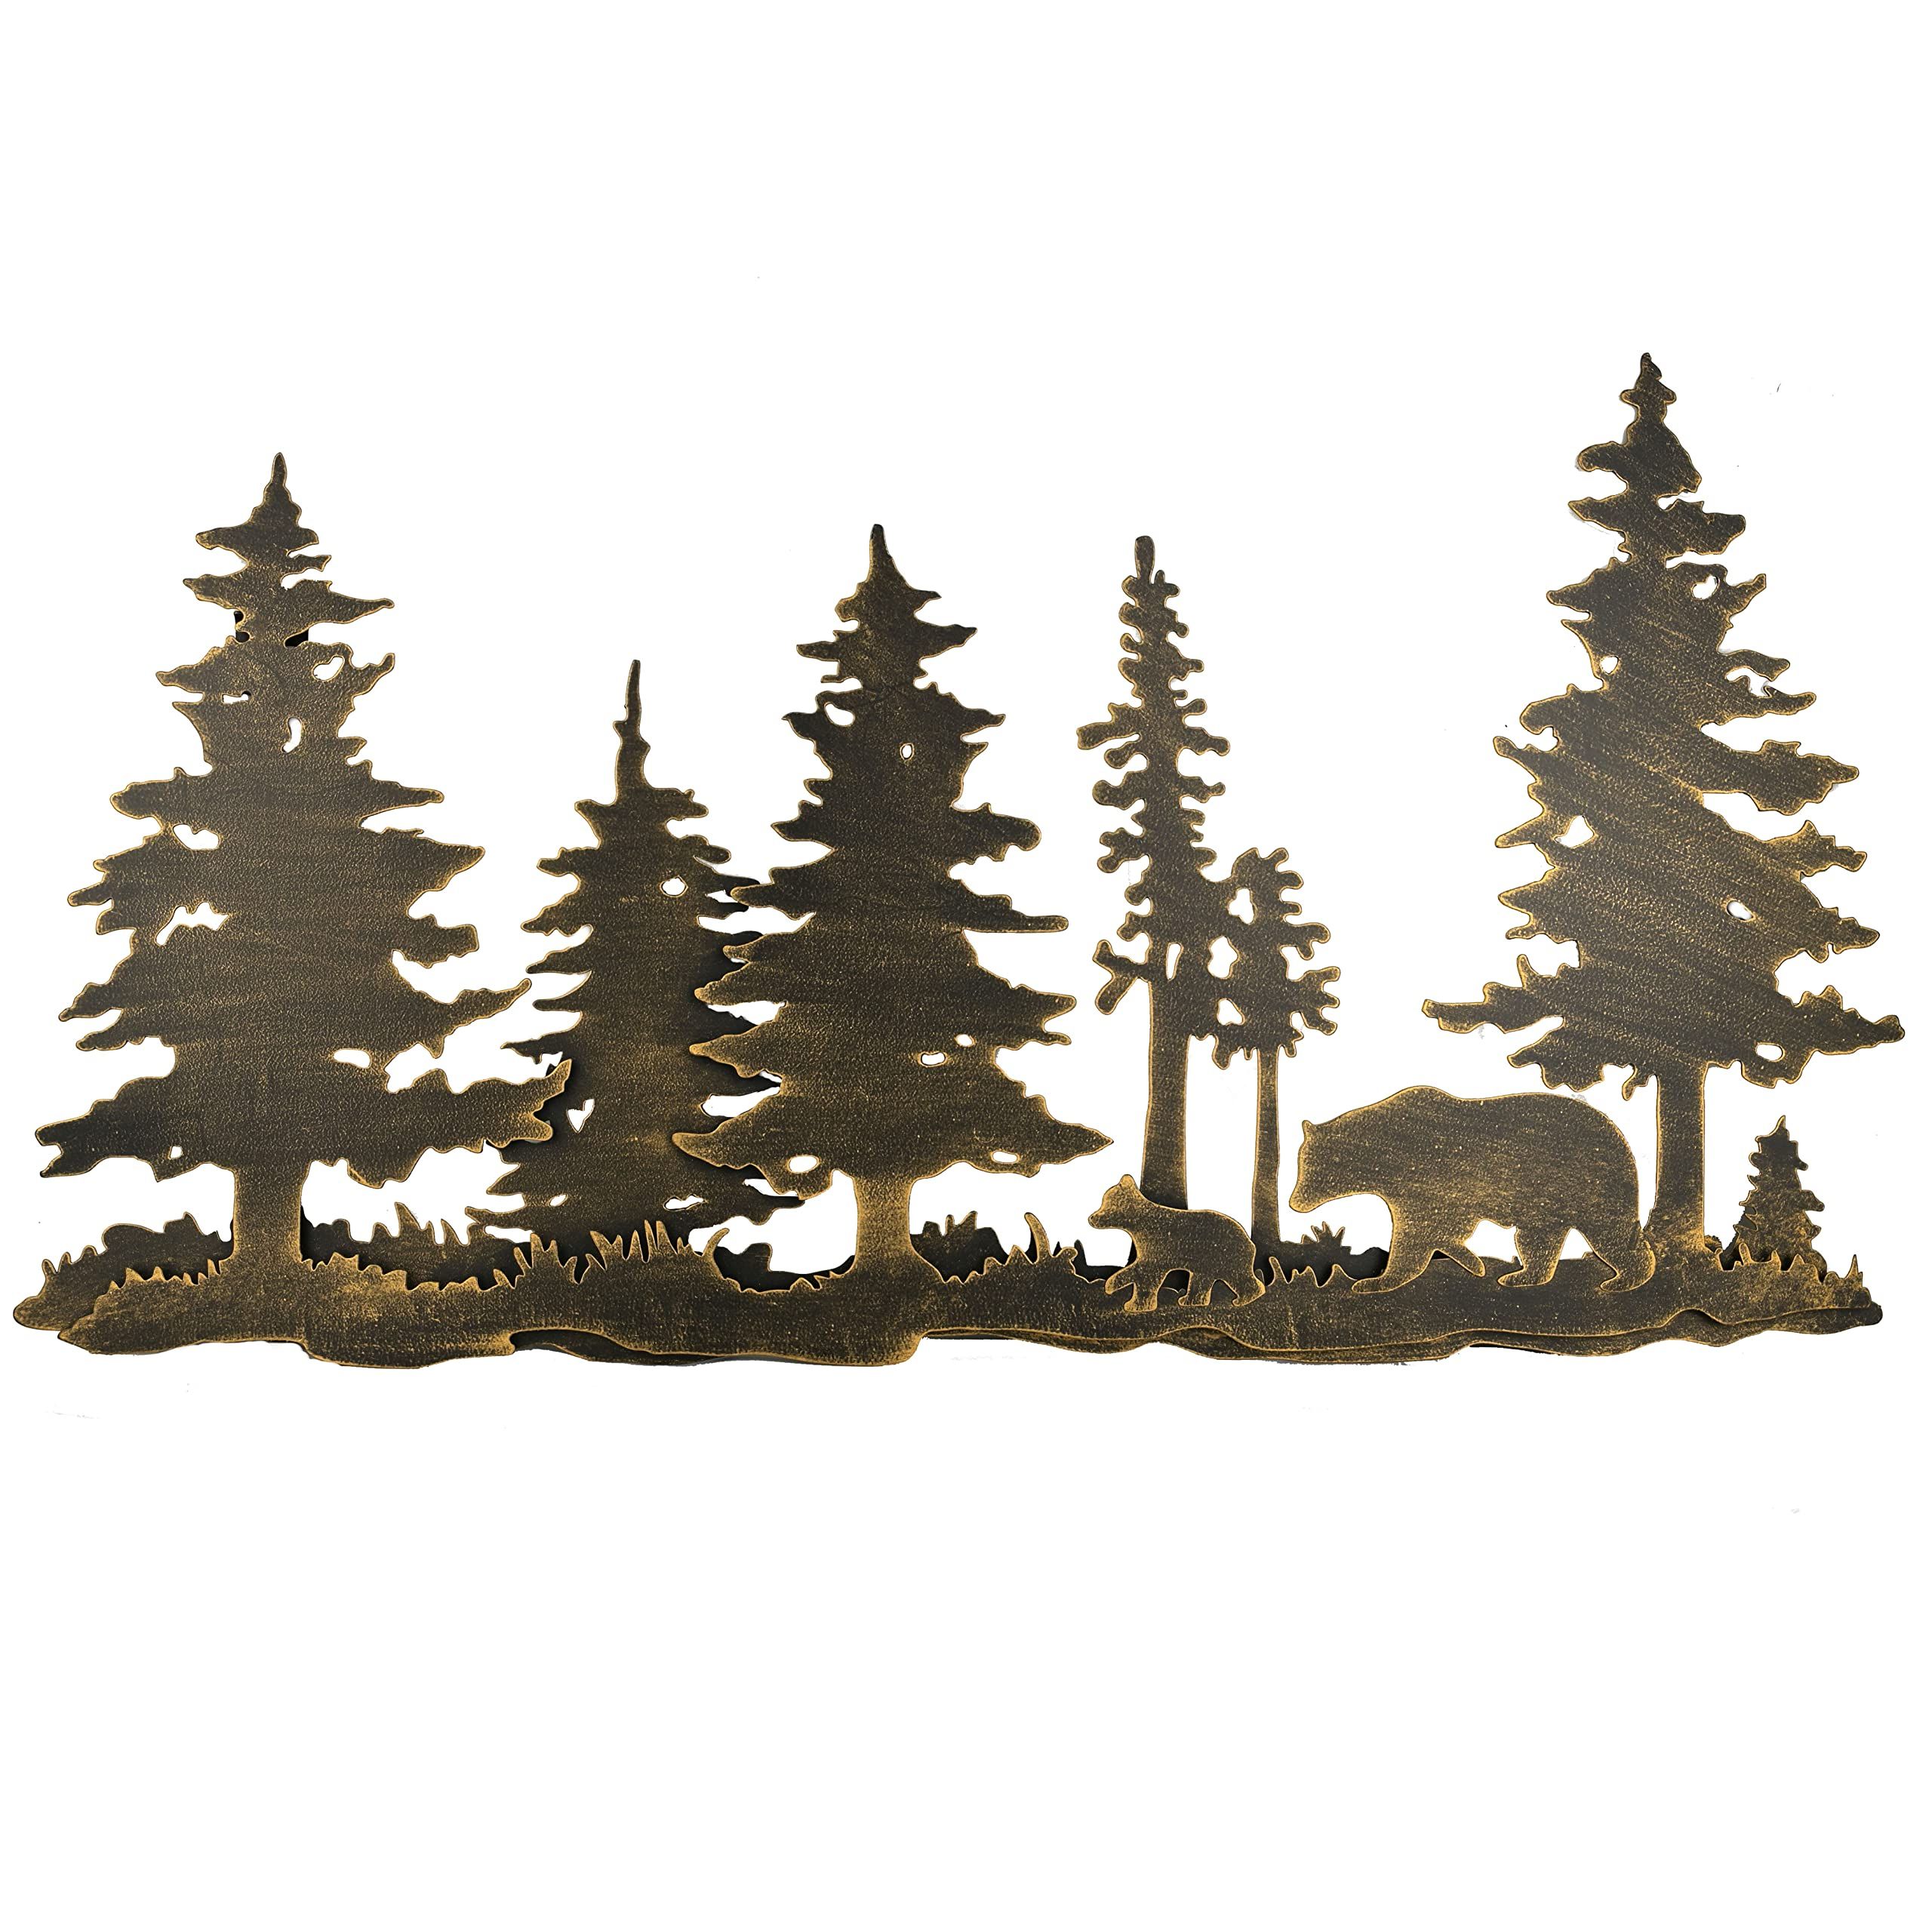 Preferred 3 Layers Wall Sculptures Within Amazon: Remenna Cabin Wall Decor 3 Layer Bear Wall Decor Rustic Metal Wall  Art Hanging For Living Room Bedroom Bathroom Indoor Outdoor 22x12 Inches :  Home & Kitchen (Photo 1 of 15)